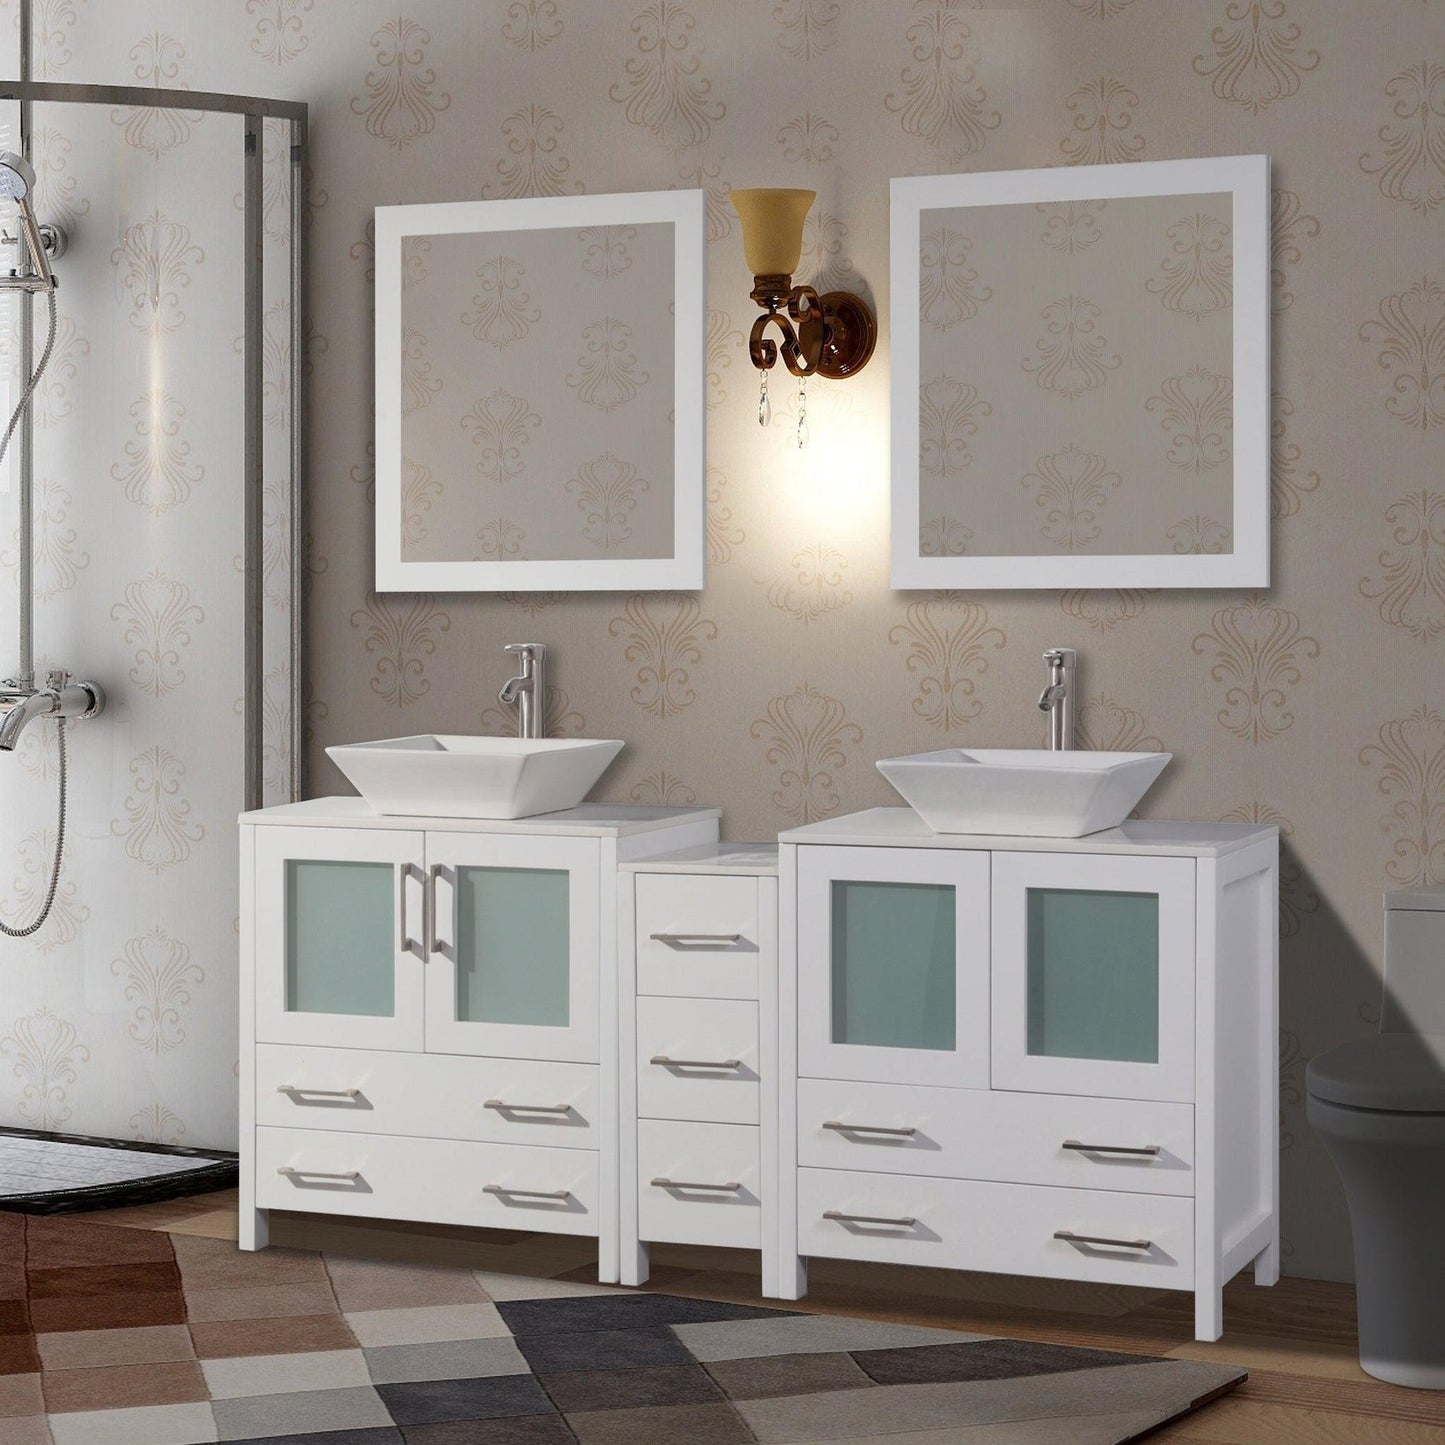 Vanity Art Ravenna 72" Double White Freestanding Vanity Set With White Engineered Marble Top, Ceramic Vessel Sink, 1 Side Cabinet and 2 Mirrors